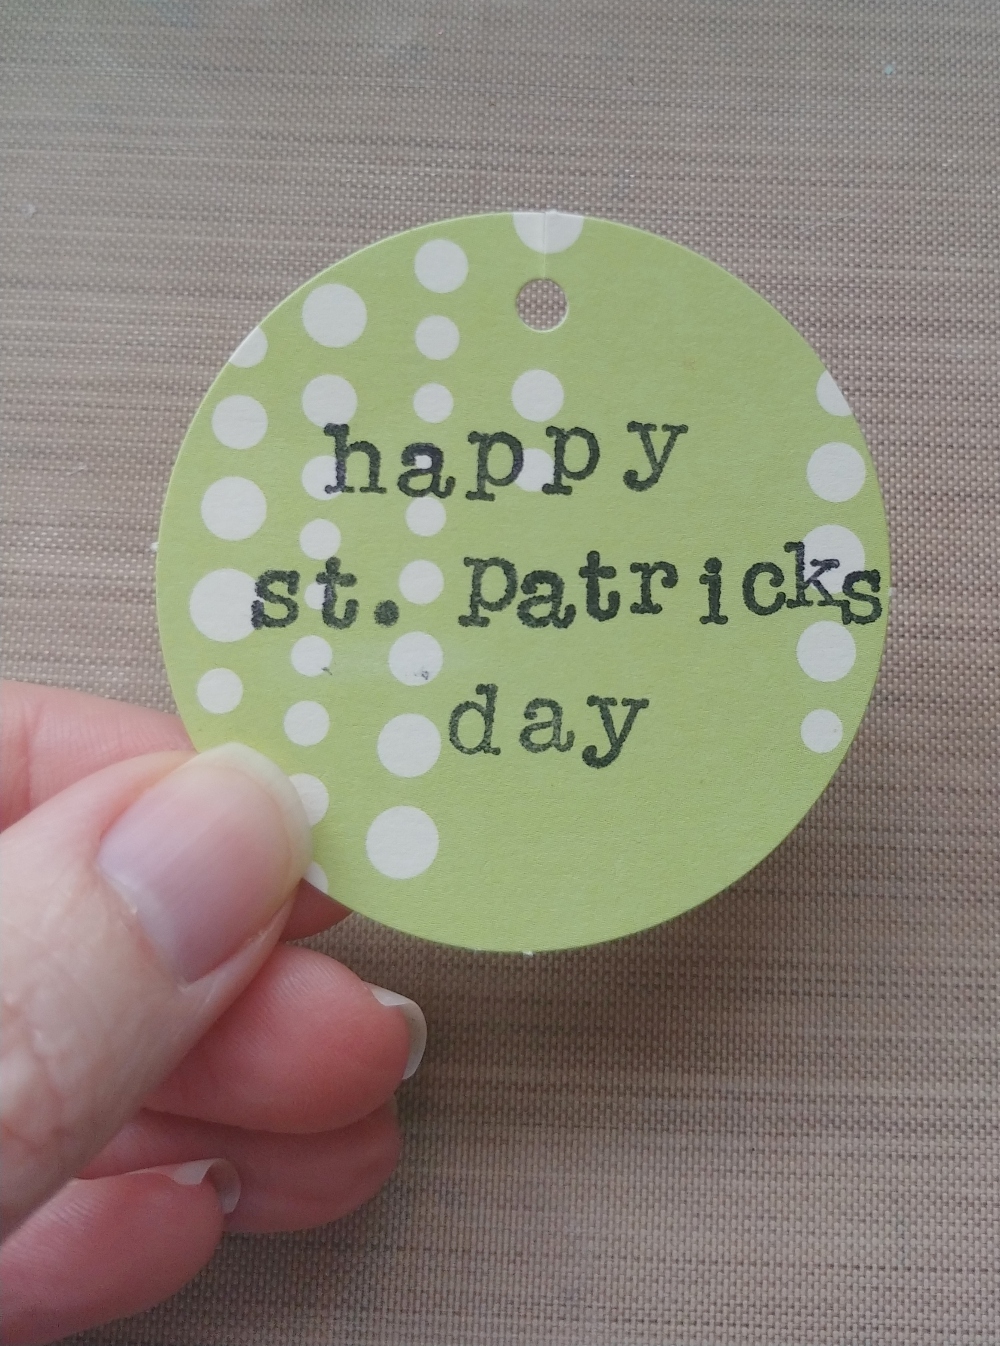 st. patrick's day tag